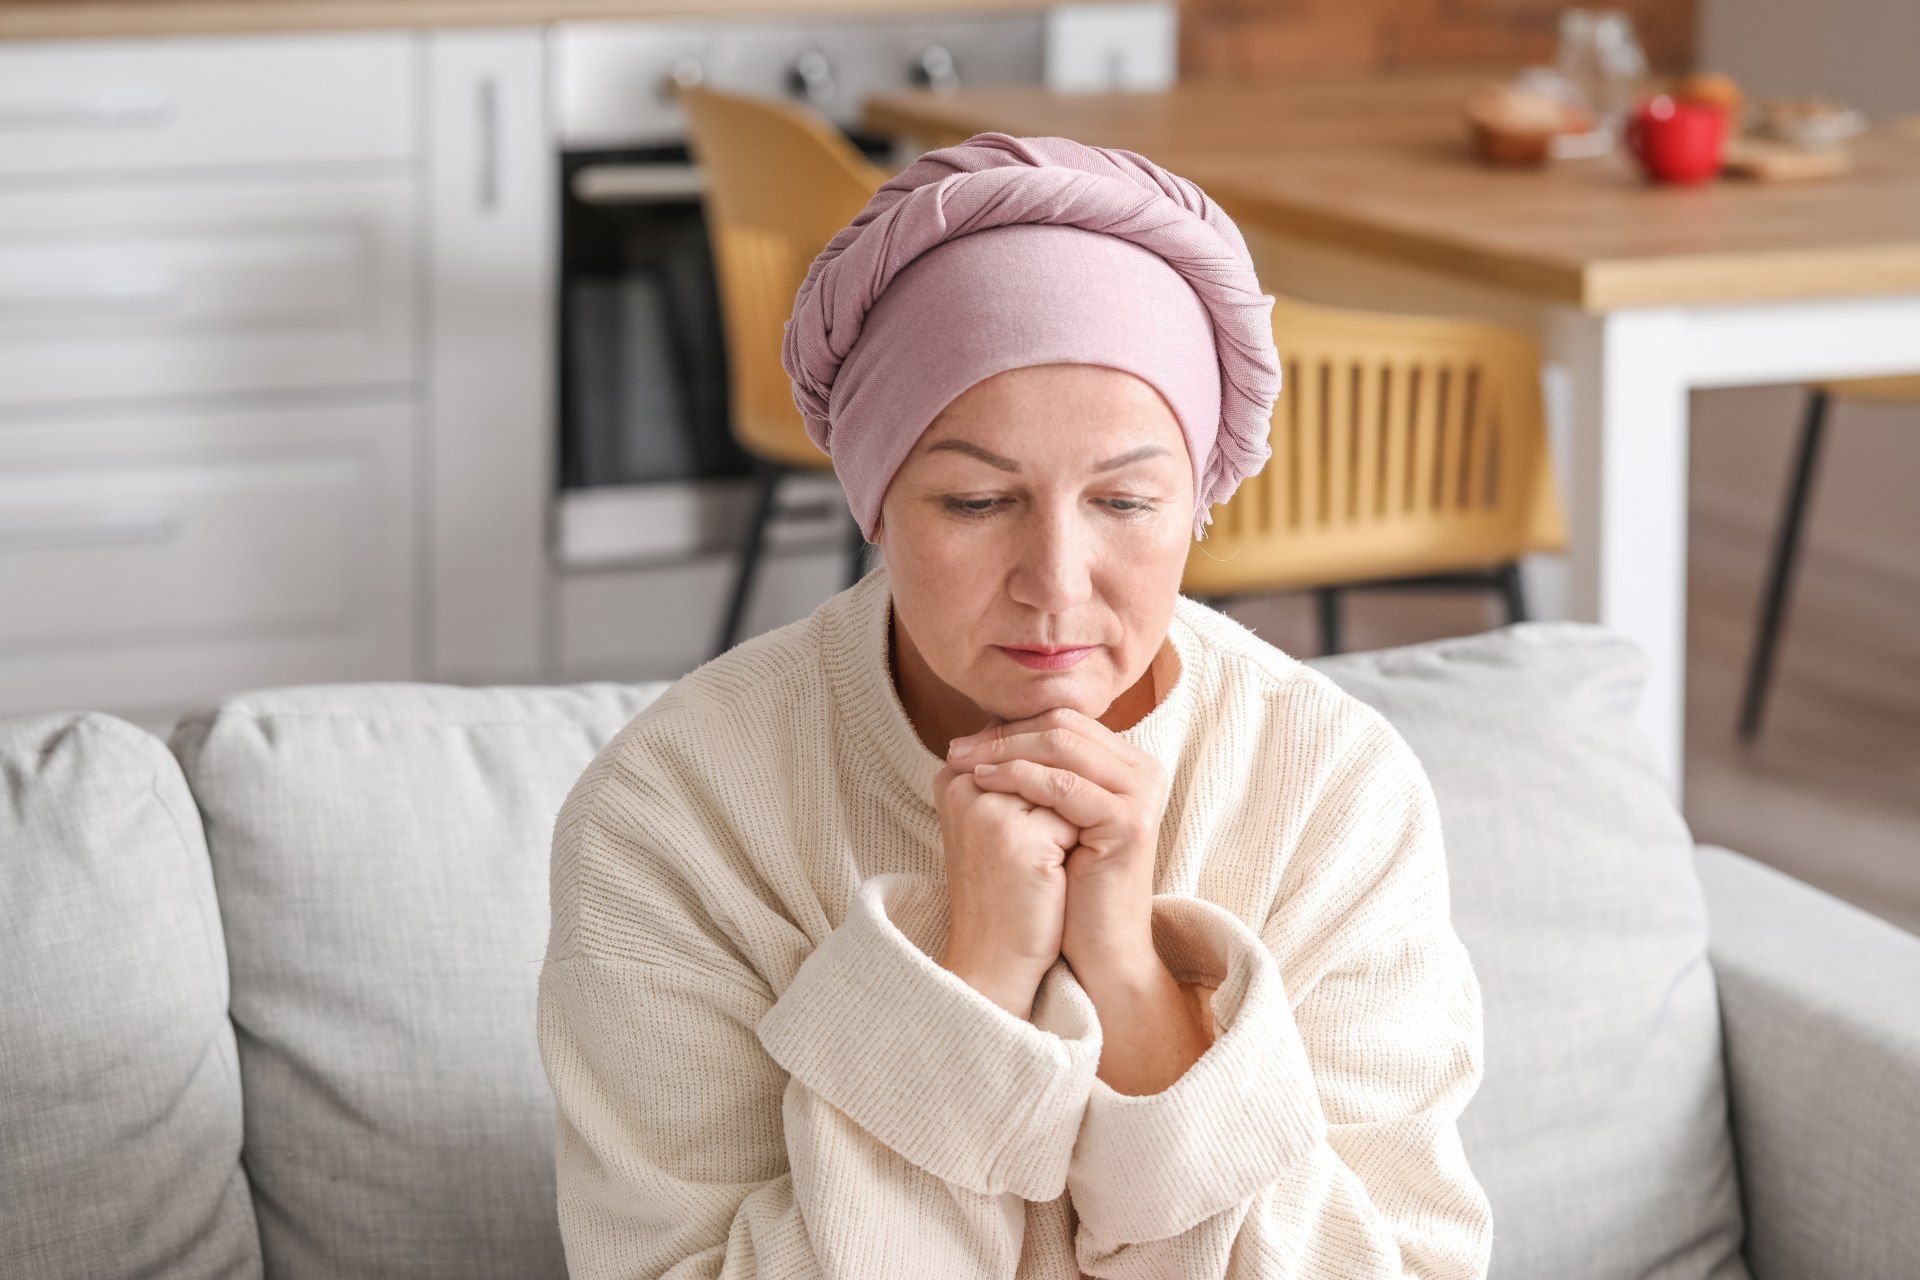 A woman with a head covering sits at home after chemotherapy - texas electric grid